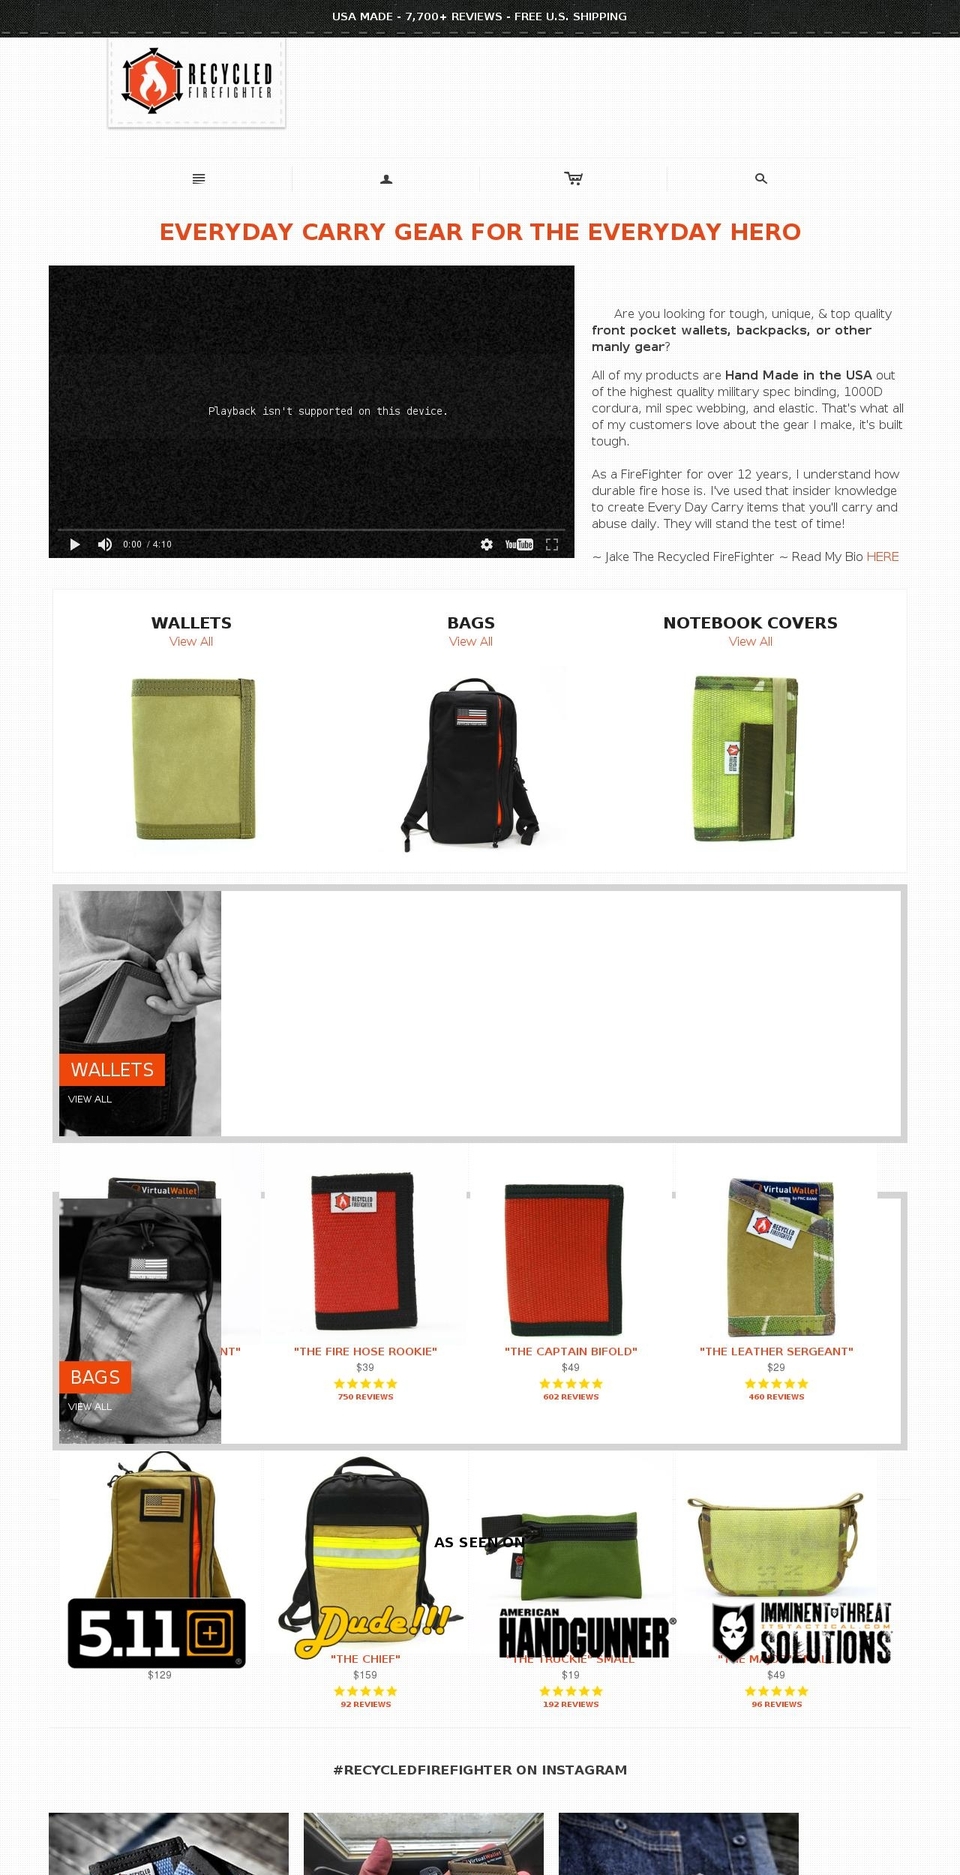 turbo Shopify theme site example recycledfirefighter.com